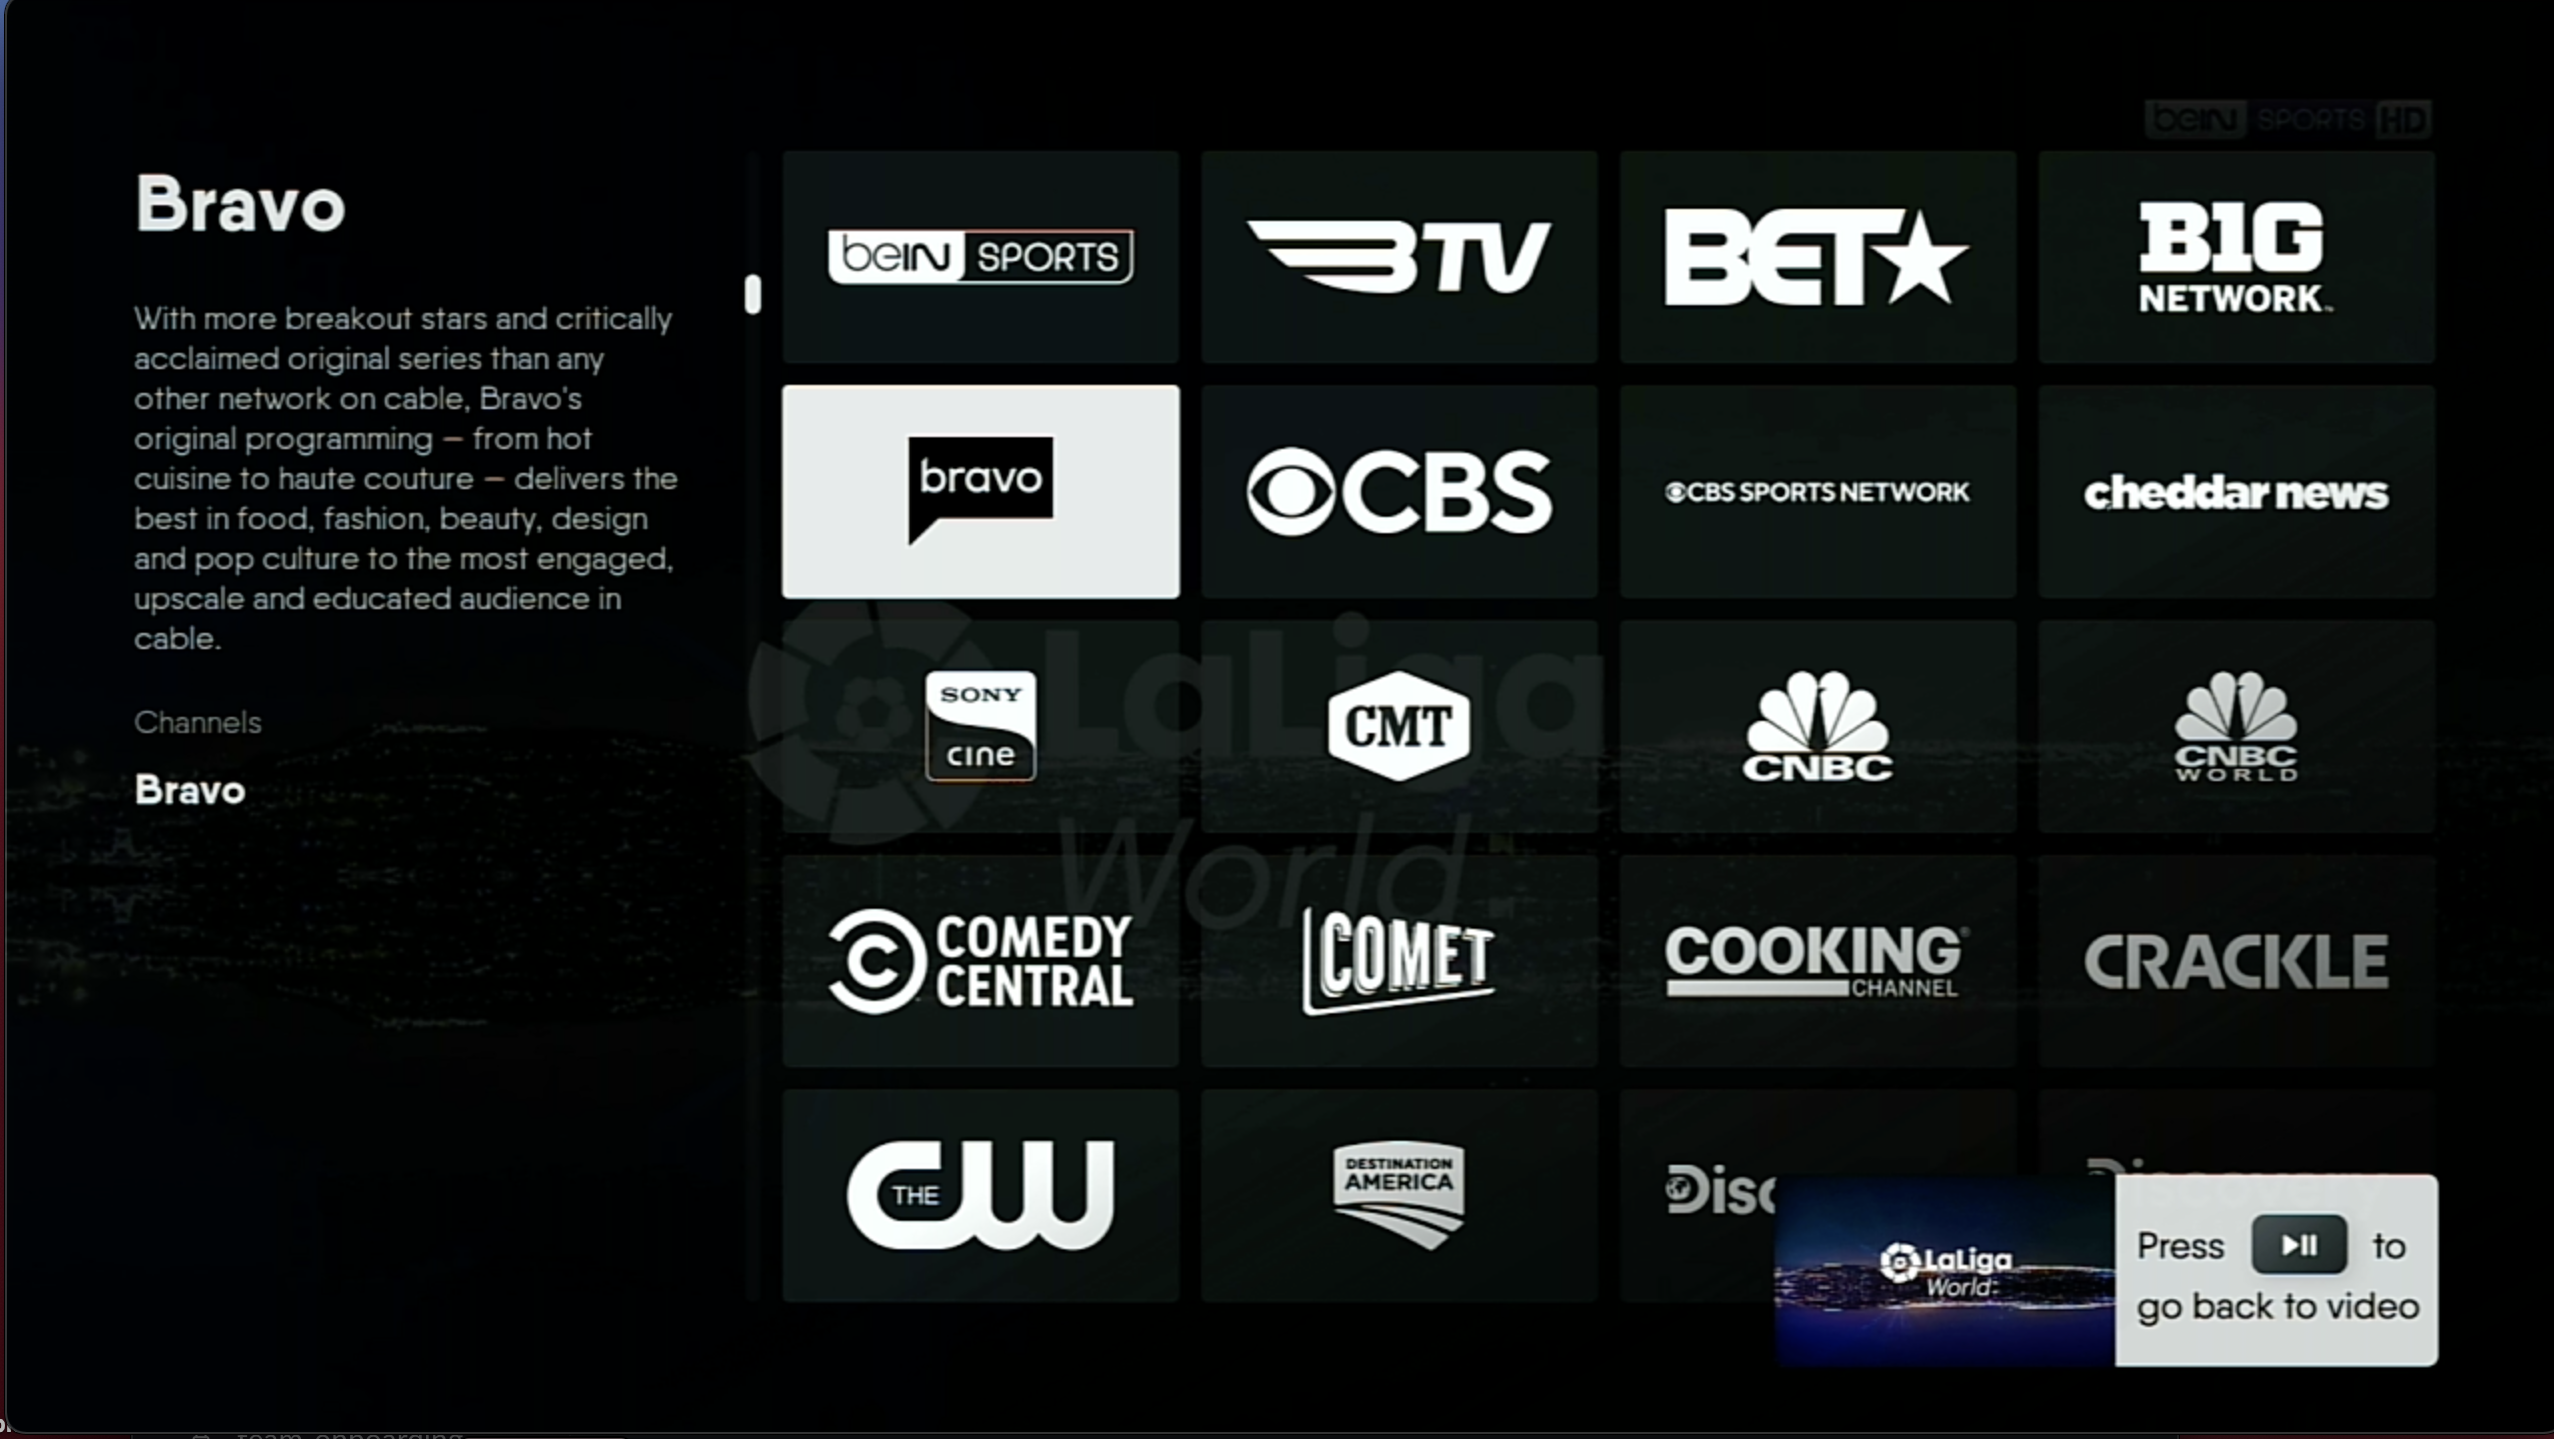 NETWORKS screen of the FuboTV app on Roku, showing available channels in subscription; accessible from the GUIDE